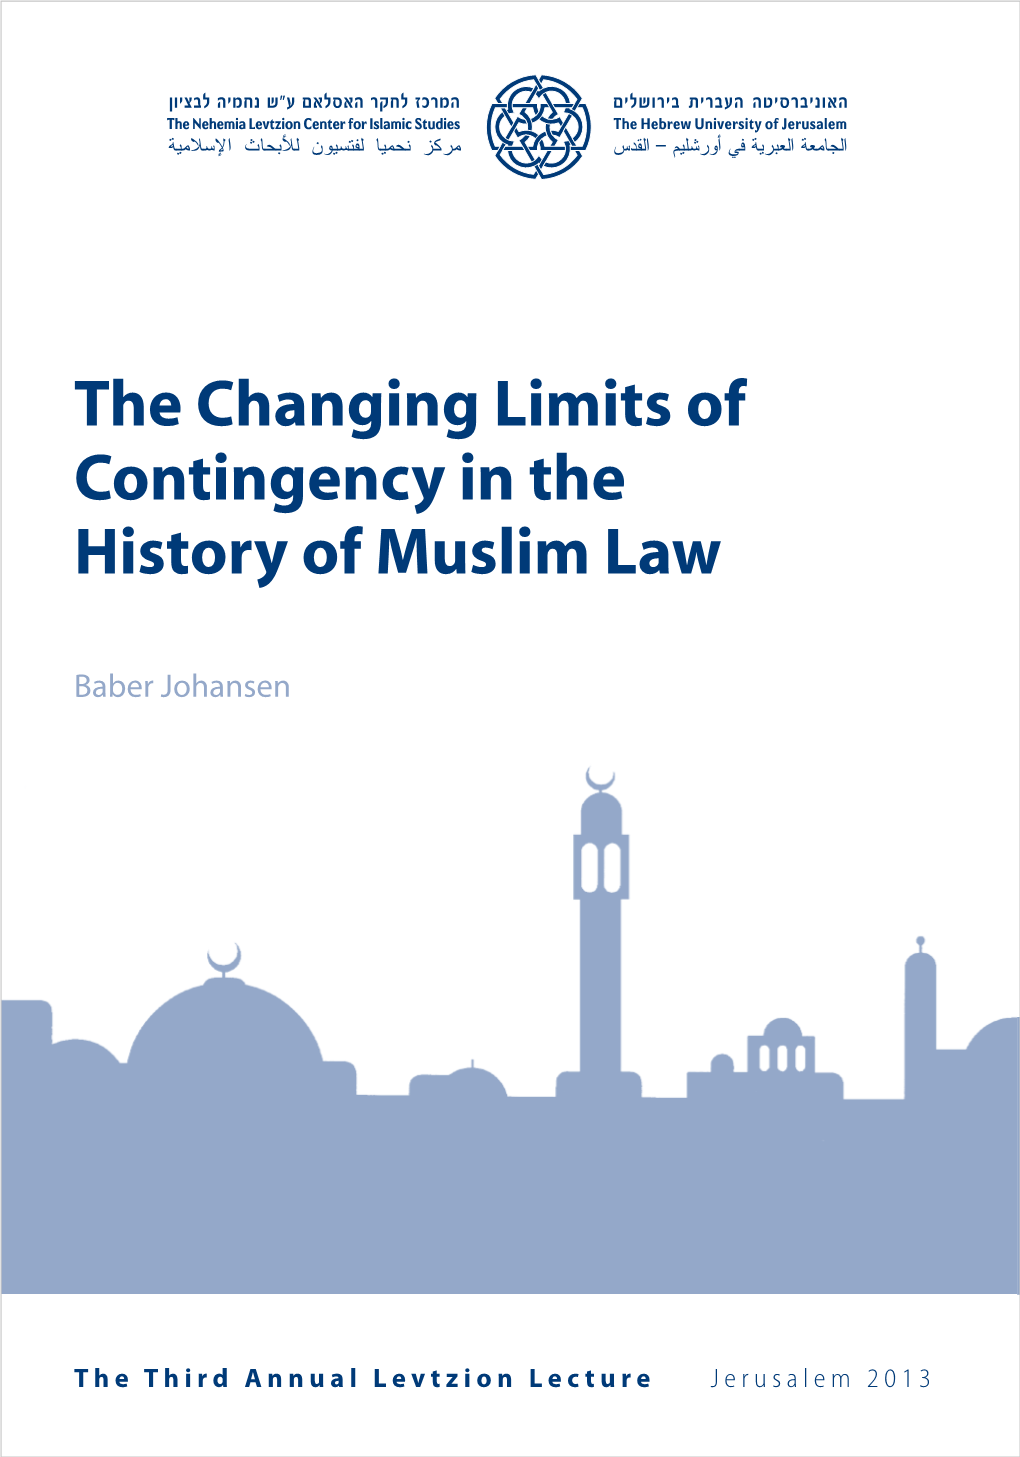 The Changing Limits of Contingency in the History of Muslim Law